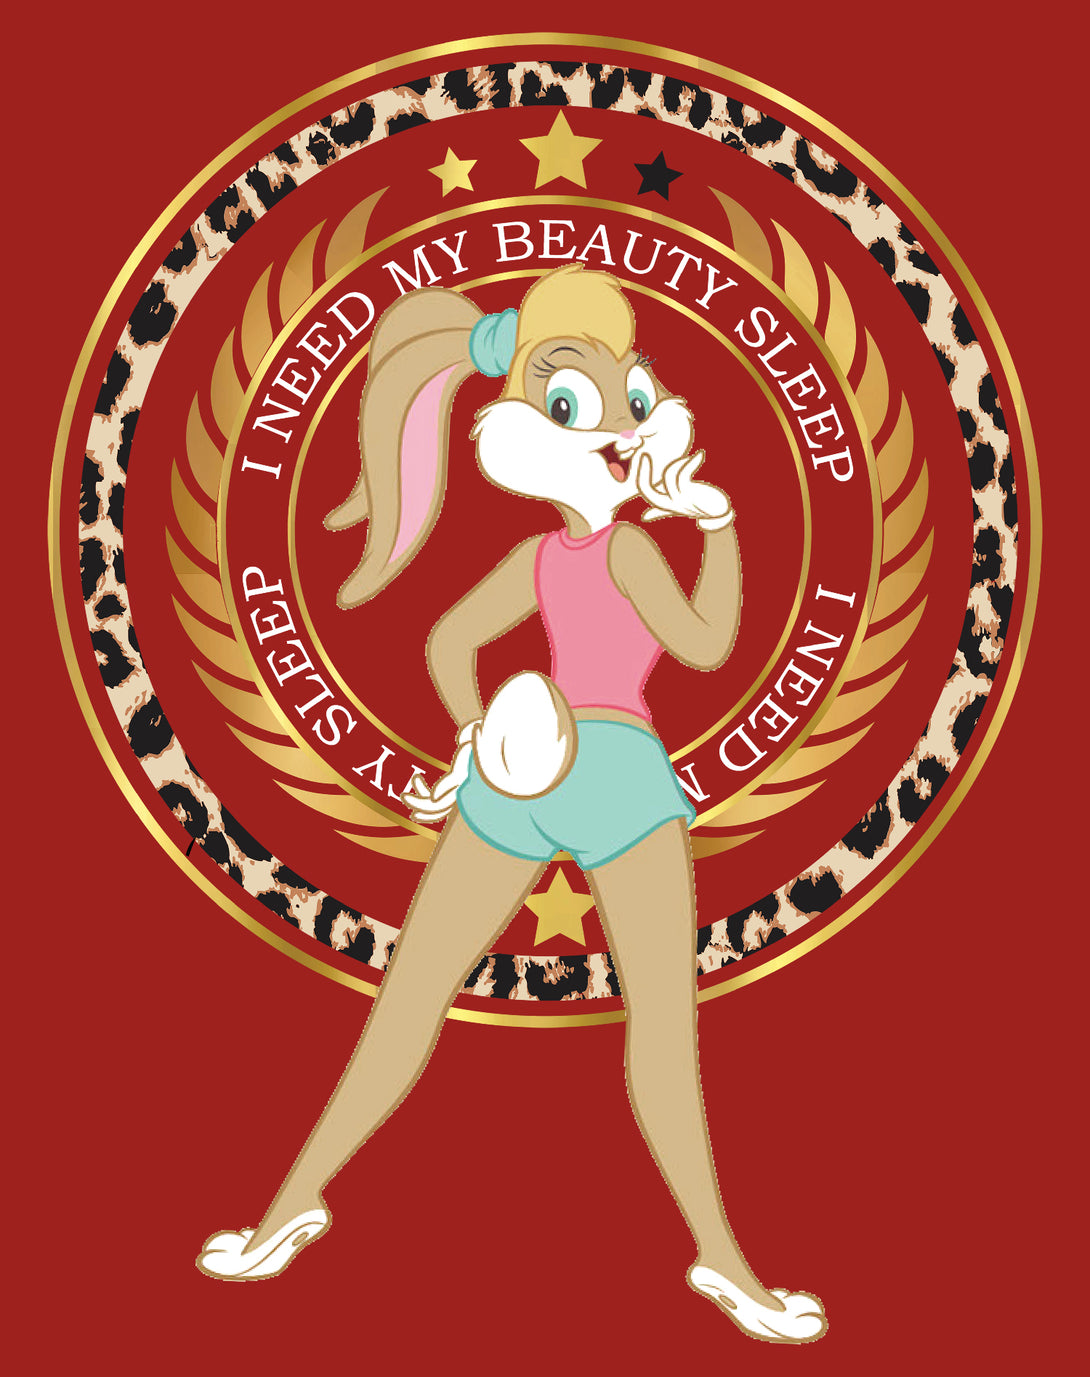 Looney Tunes Lola Bunny Beauty Sleep Official Women's T-shirt Red - Urban Species Design Close Up